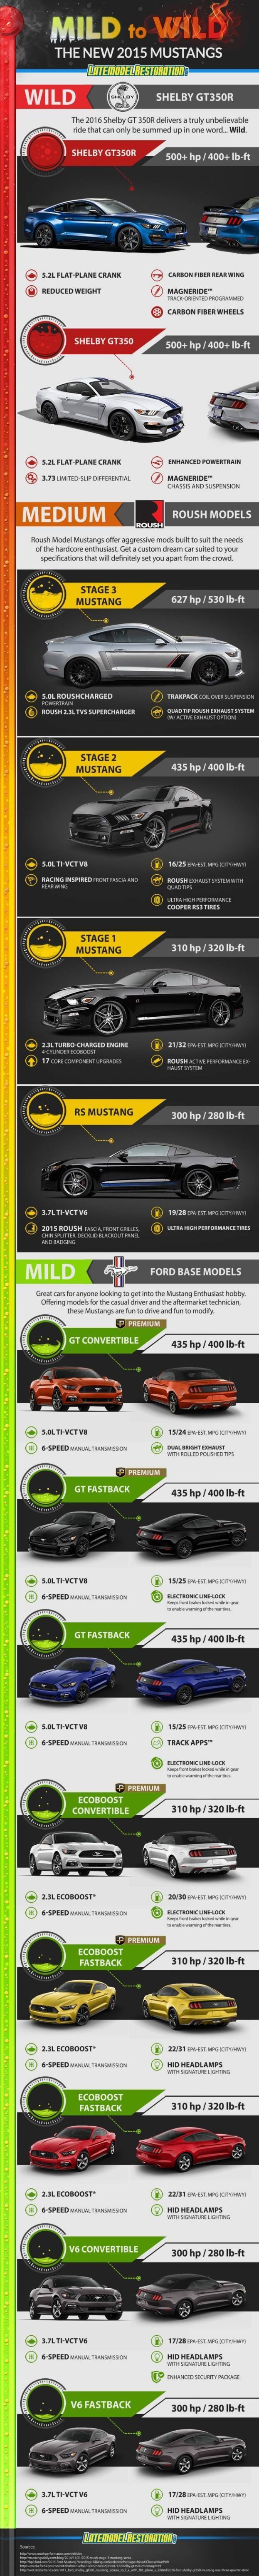 2015 Ford Mustang Infographic - Latemodel Restoration